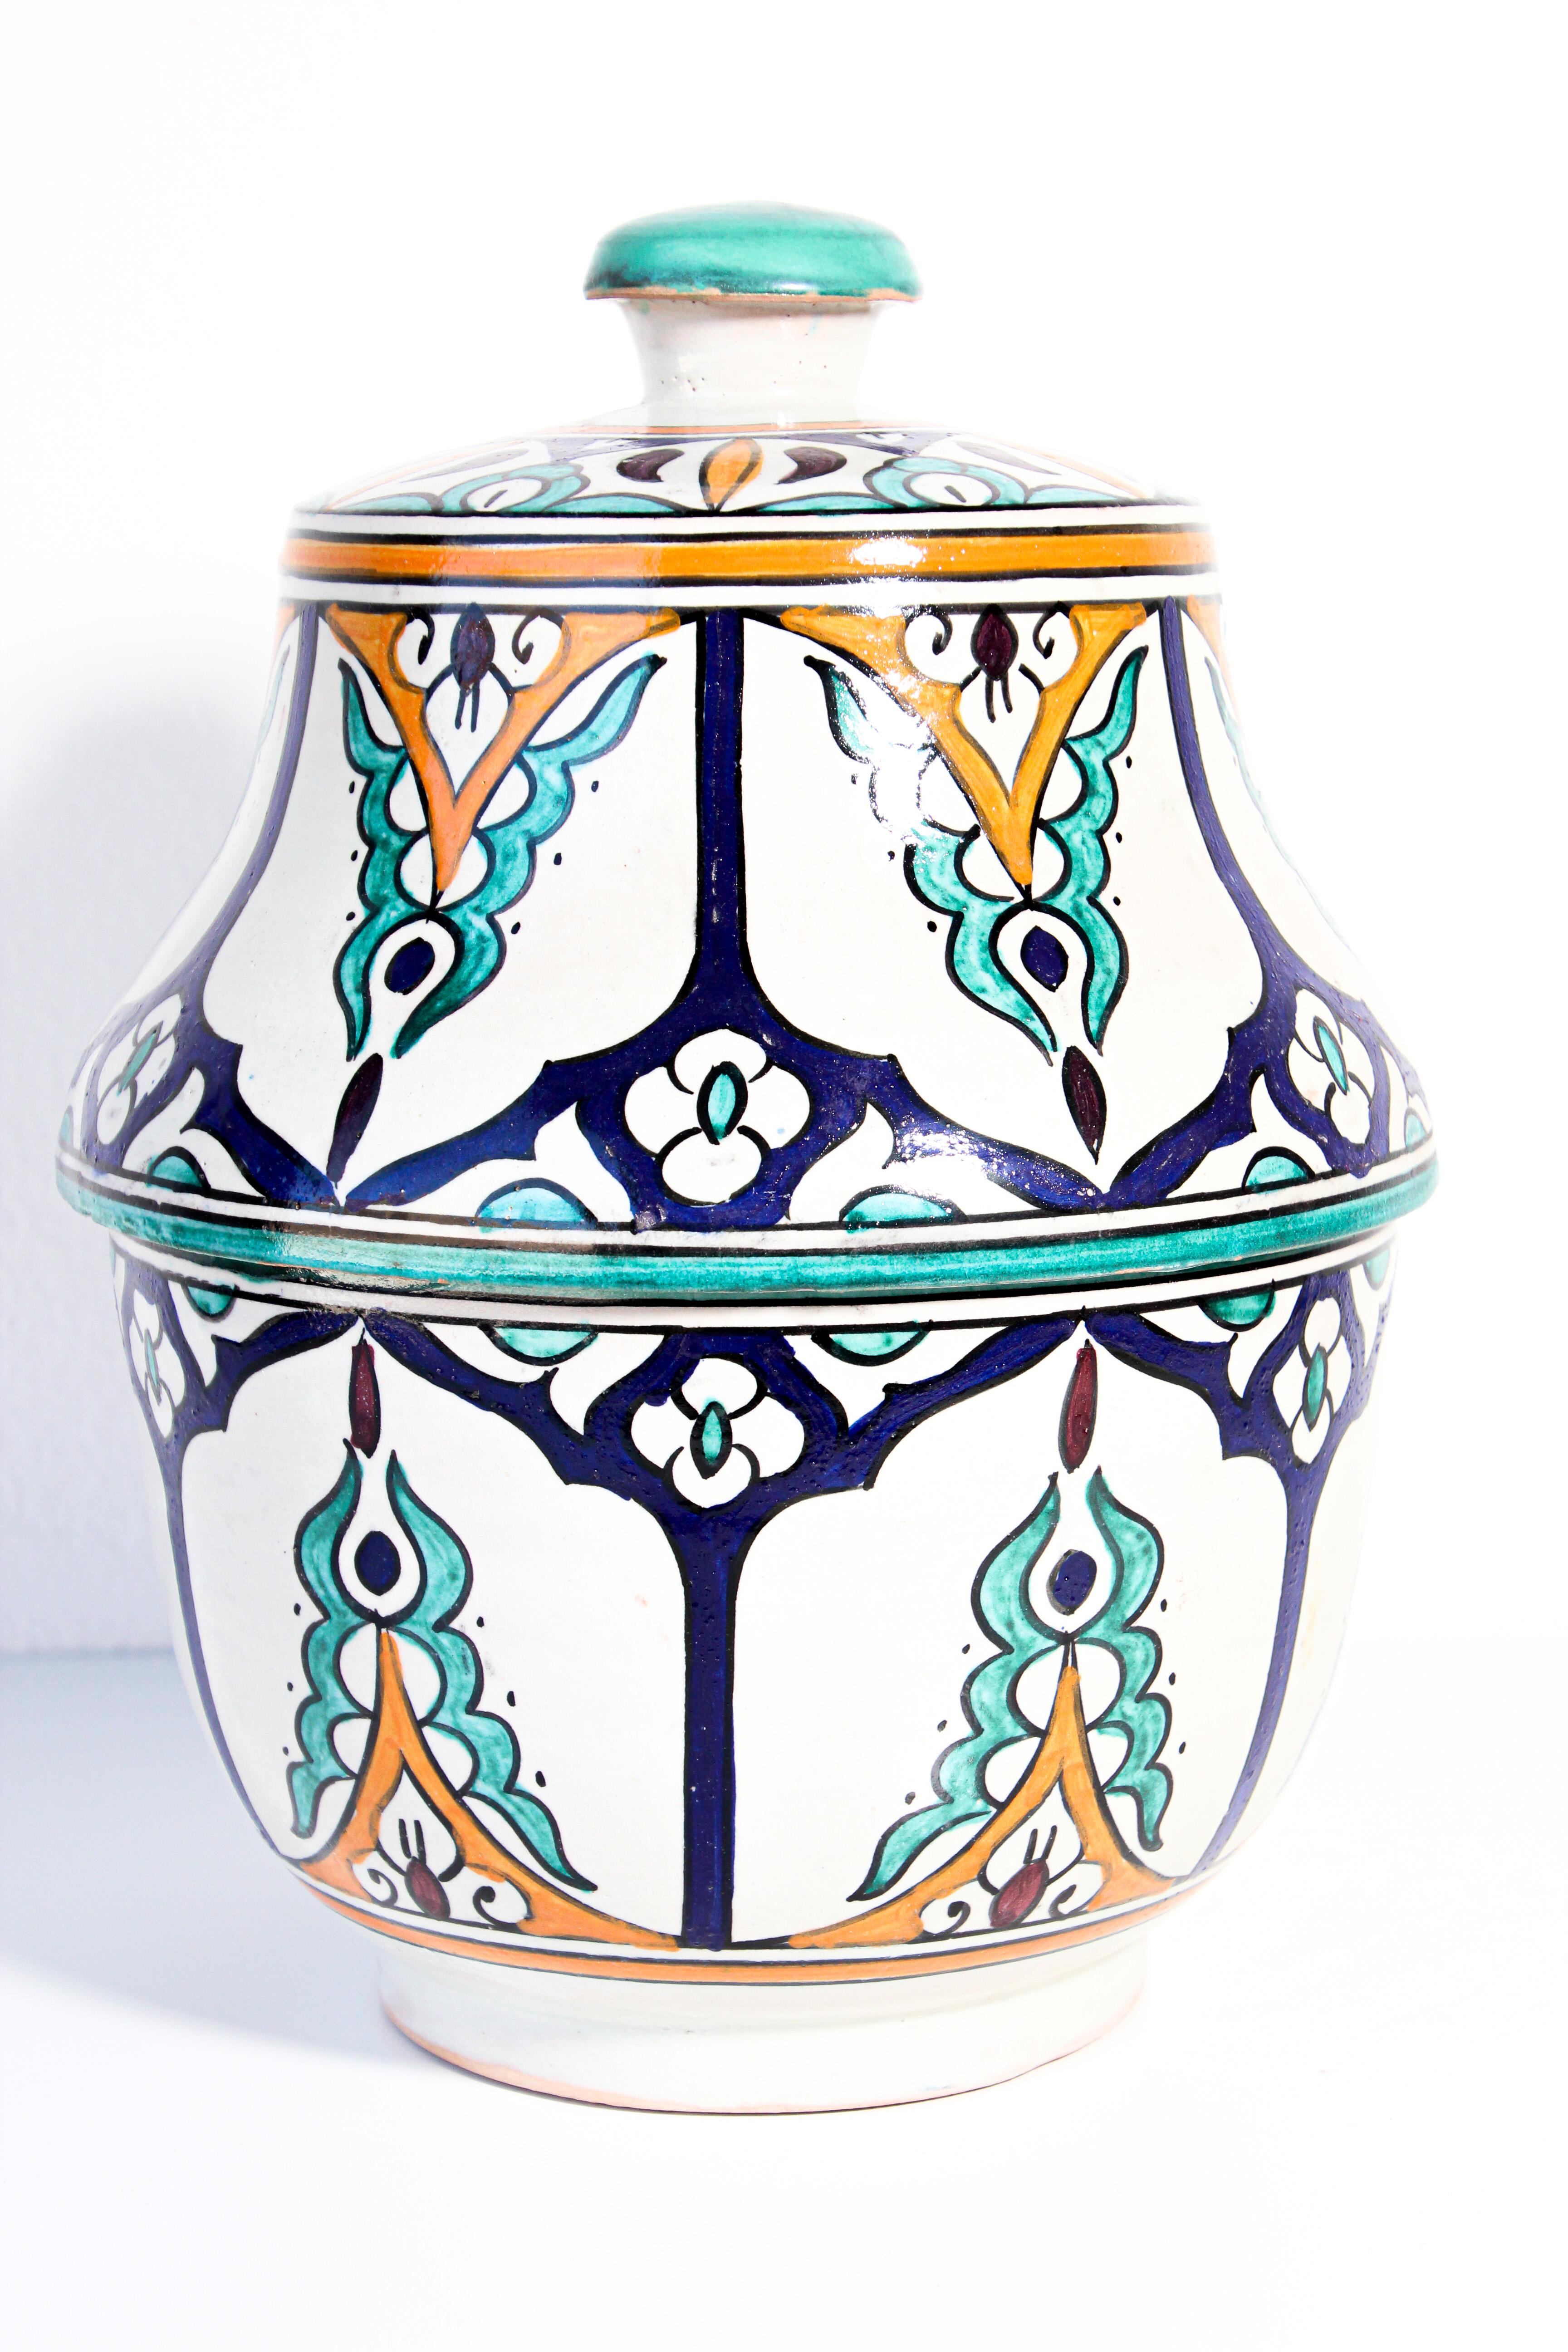 Islamic Moorish Ceramic Glazed Covered Jars Handcrafted in Fez Morocco For Sale